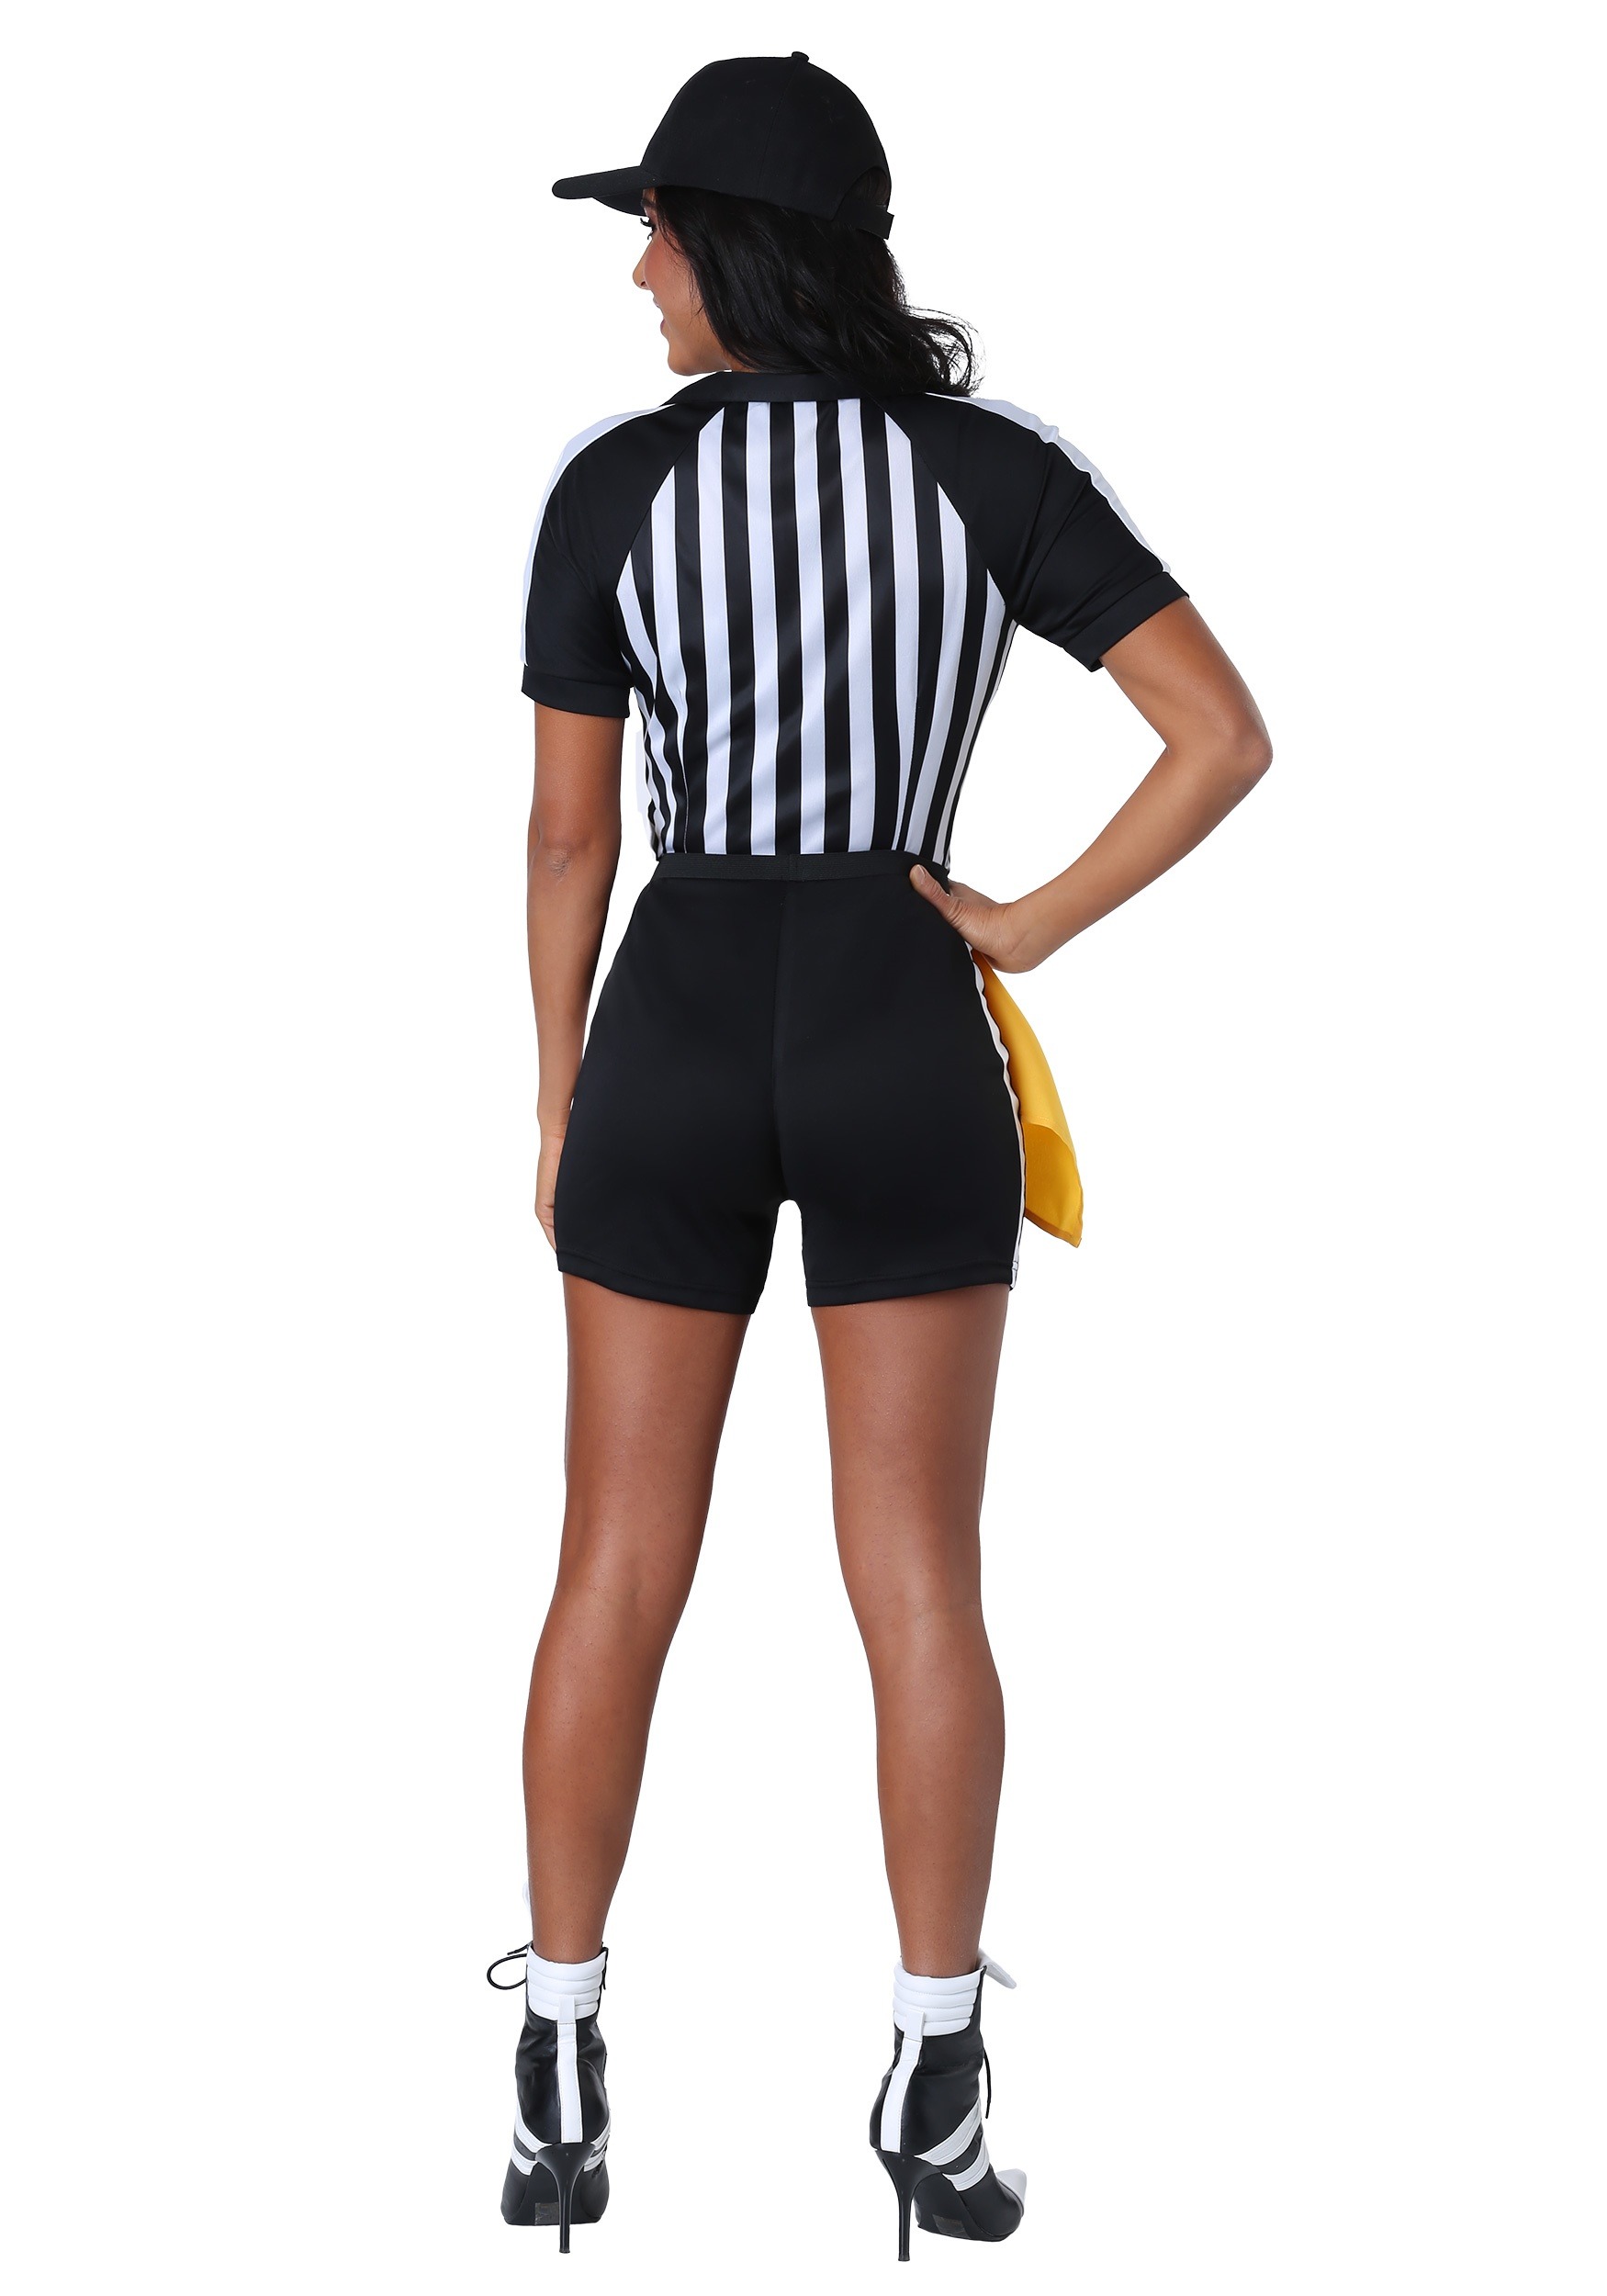 https://images.halloweencostumes.com/products/41634/2-1-85222/racy-referee-womens-costume.jpg